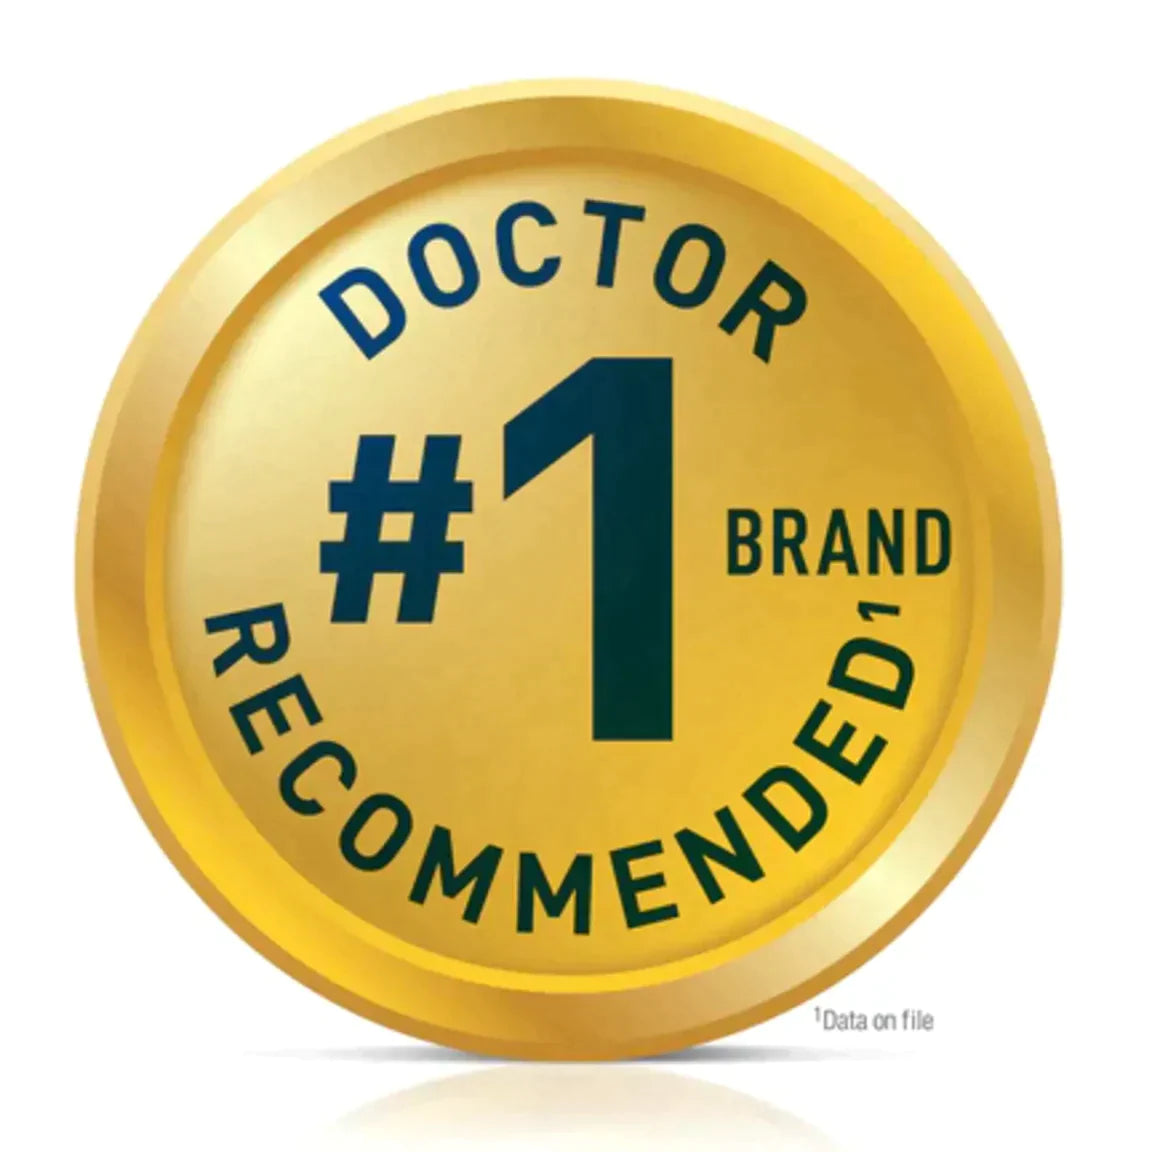 #1 doctor recommended seal 